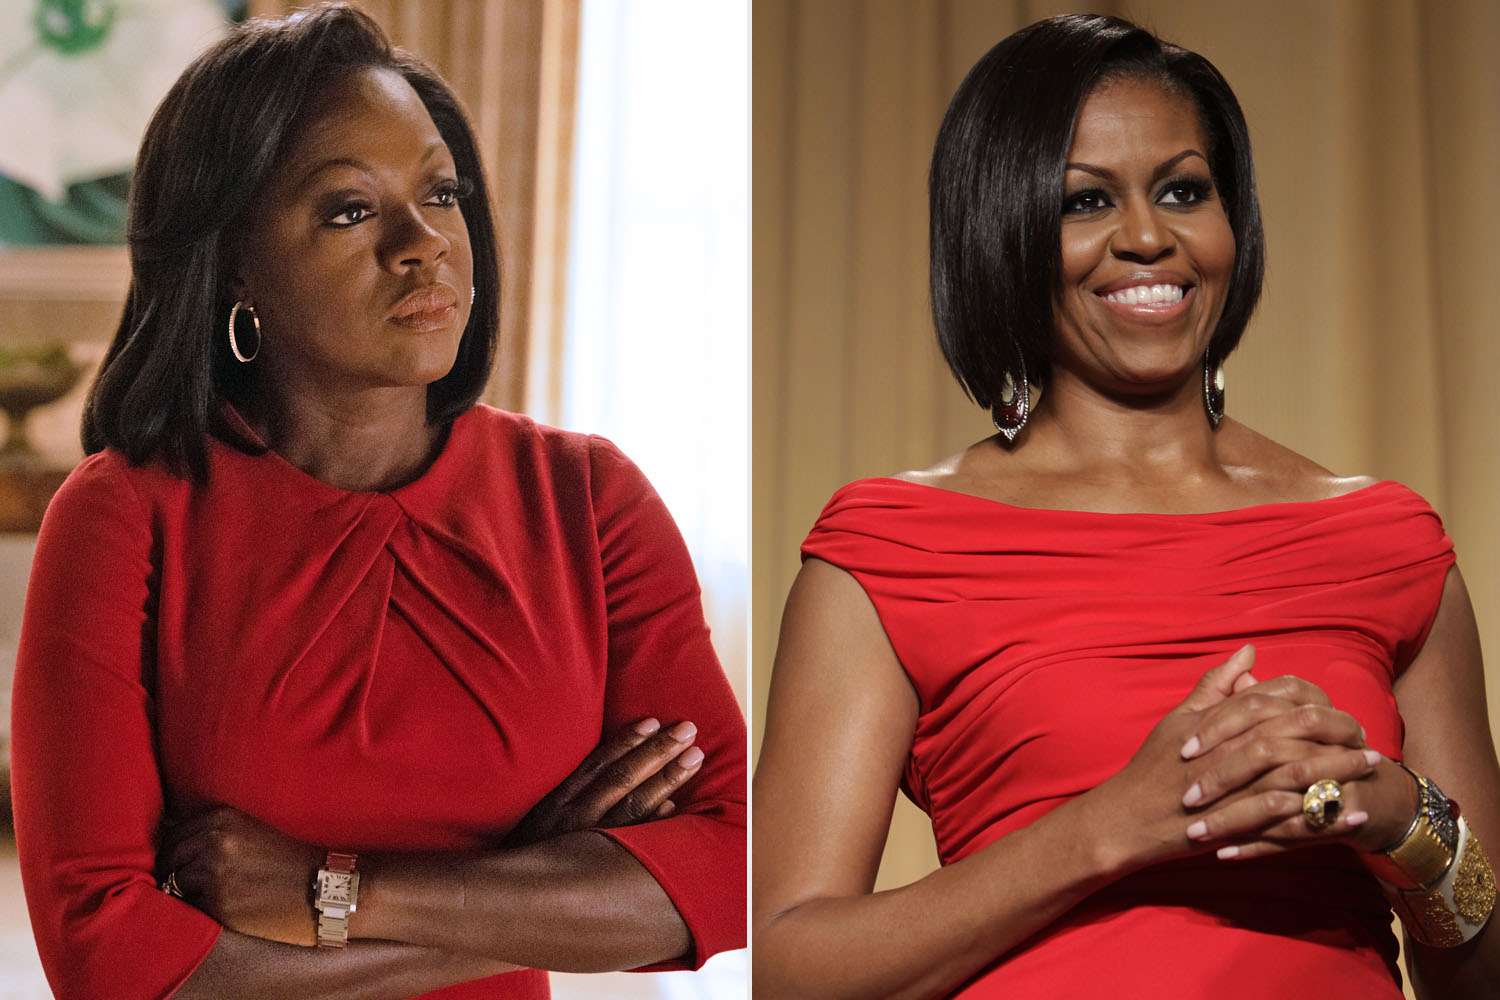 Viola Davis Responds to ‘Incredibly Hurtful’ Criticism of Her Portrayal of Michelle Obama in Showtime’s “The First Lady” Series